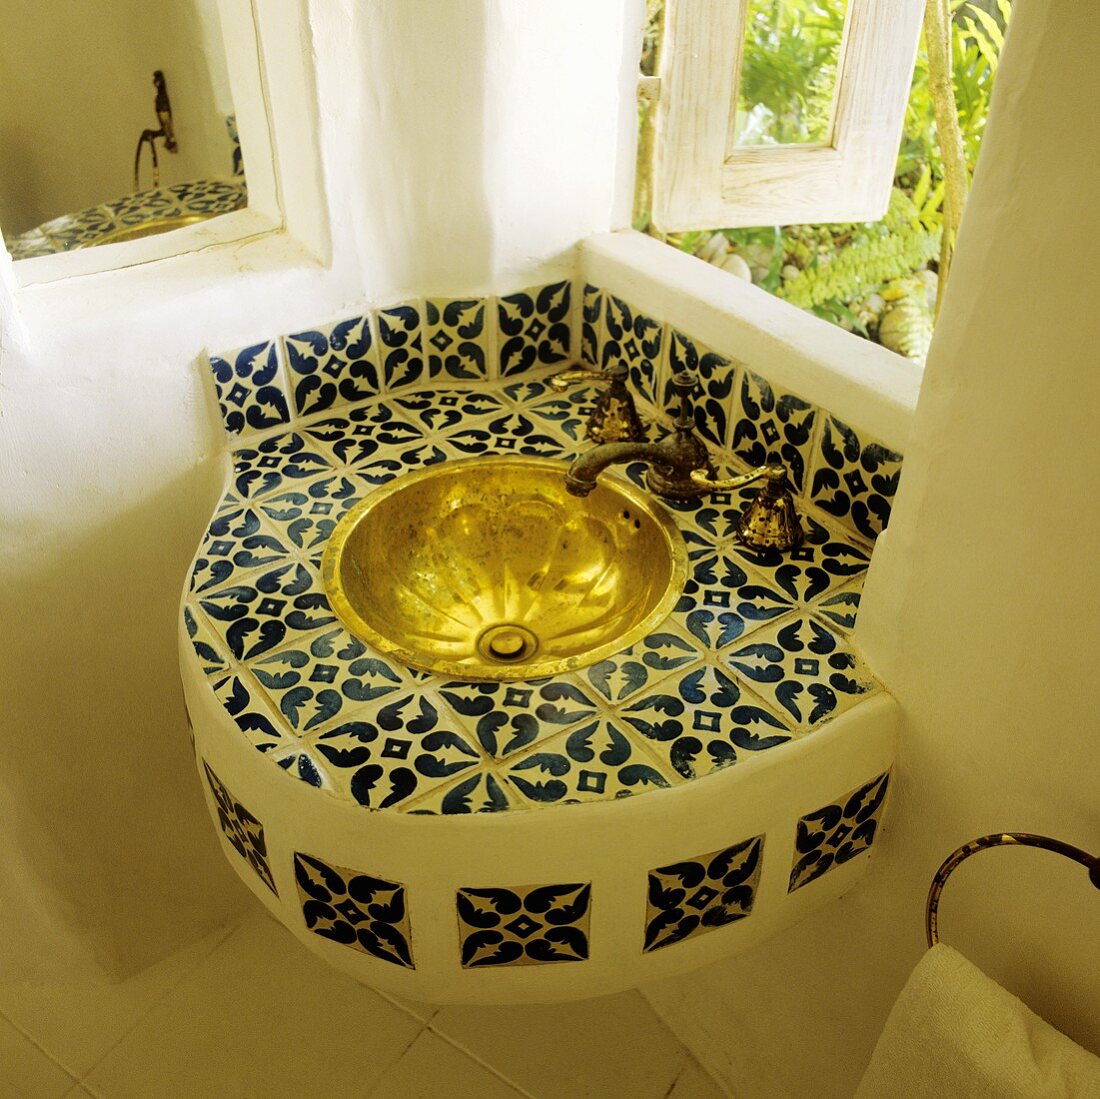 A corner of a bathroom with a tiled wash basin and a brass basin